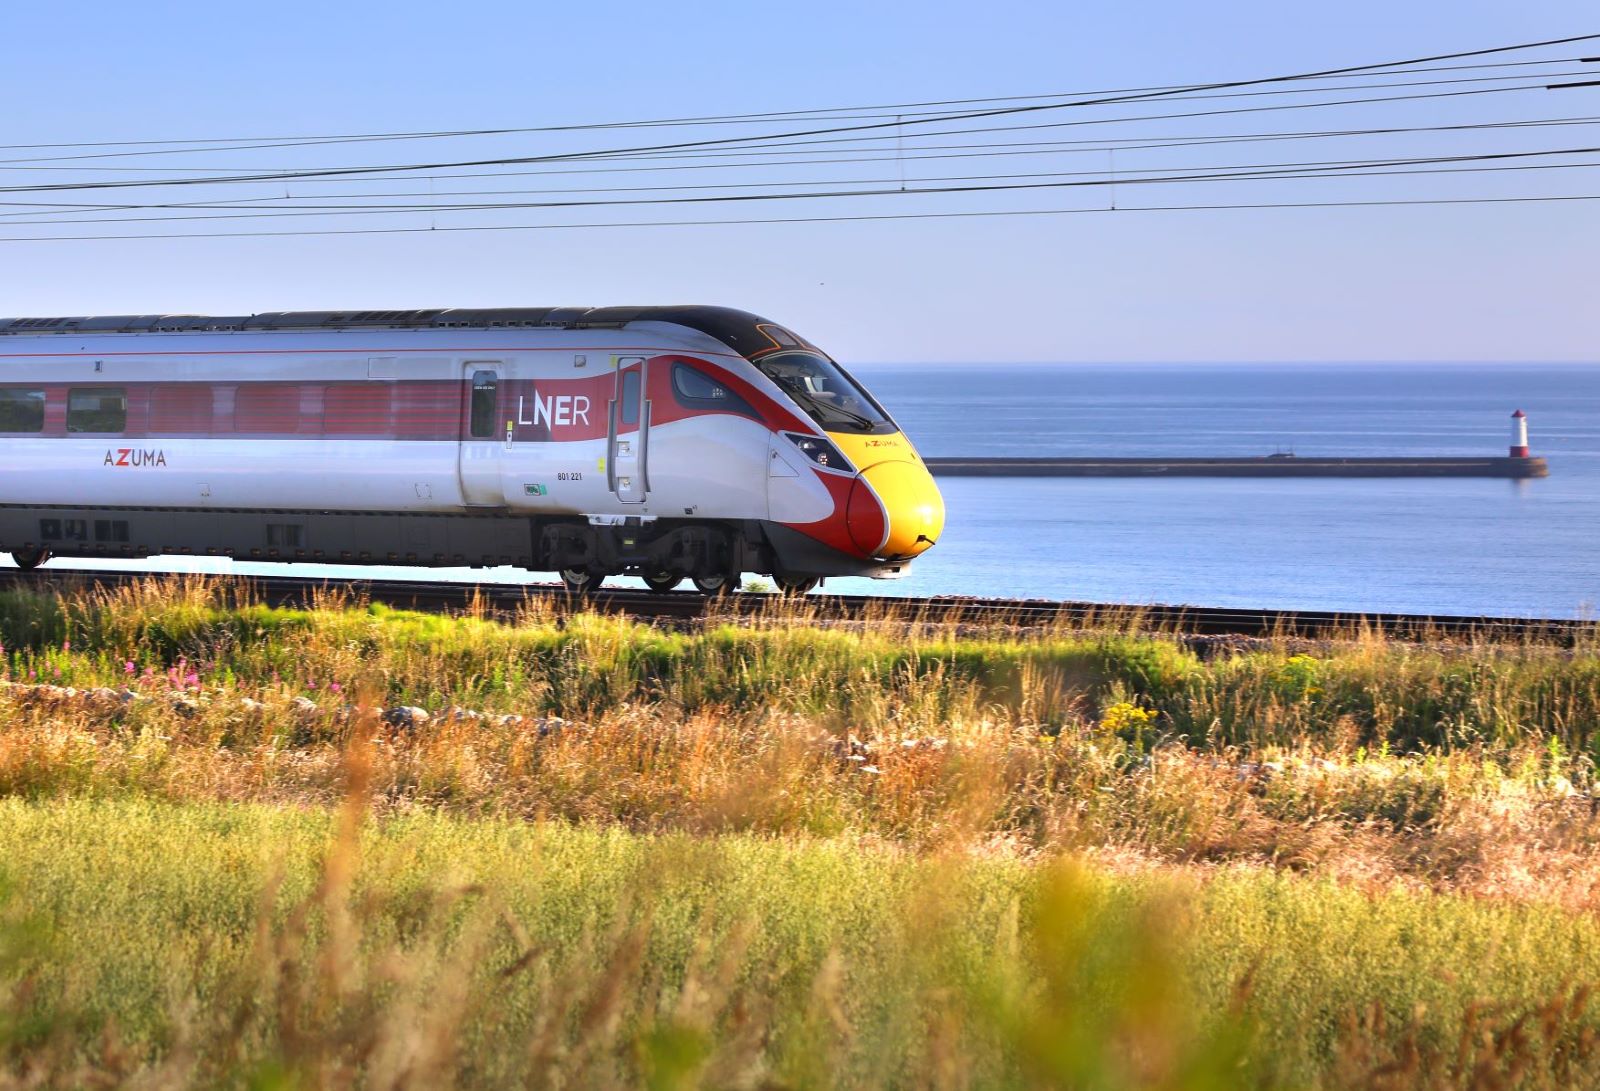 LNER Launches Sensational Seat Sale With Tickets From £5